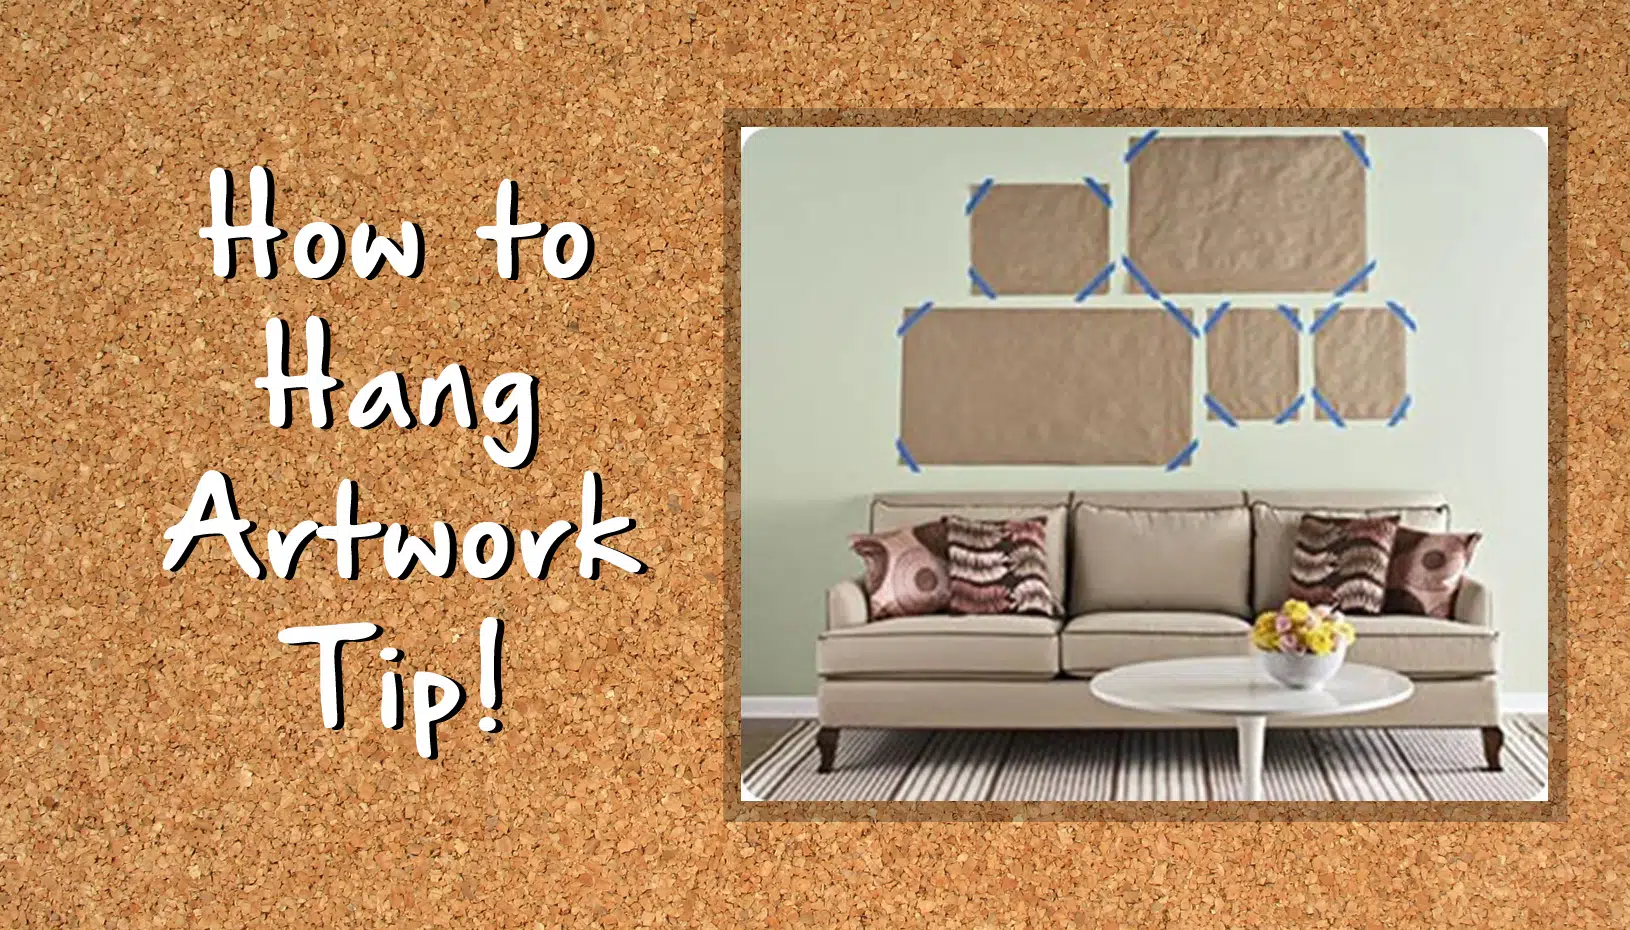 How to Hang Artwork Tip